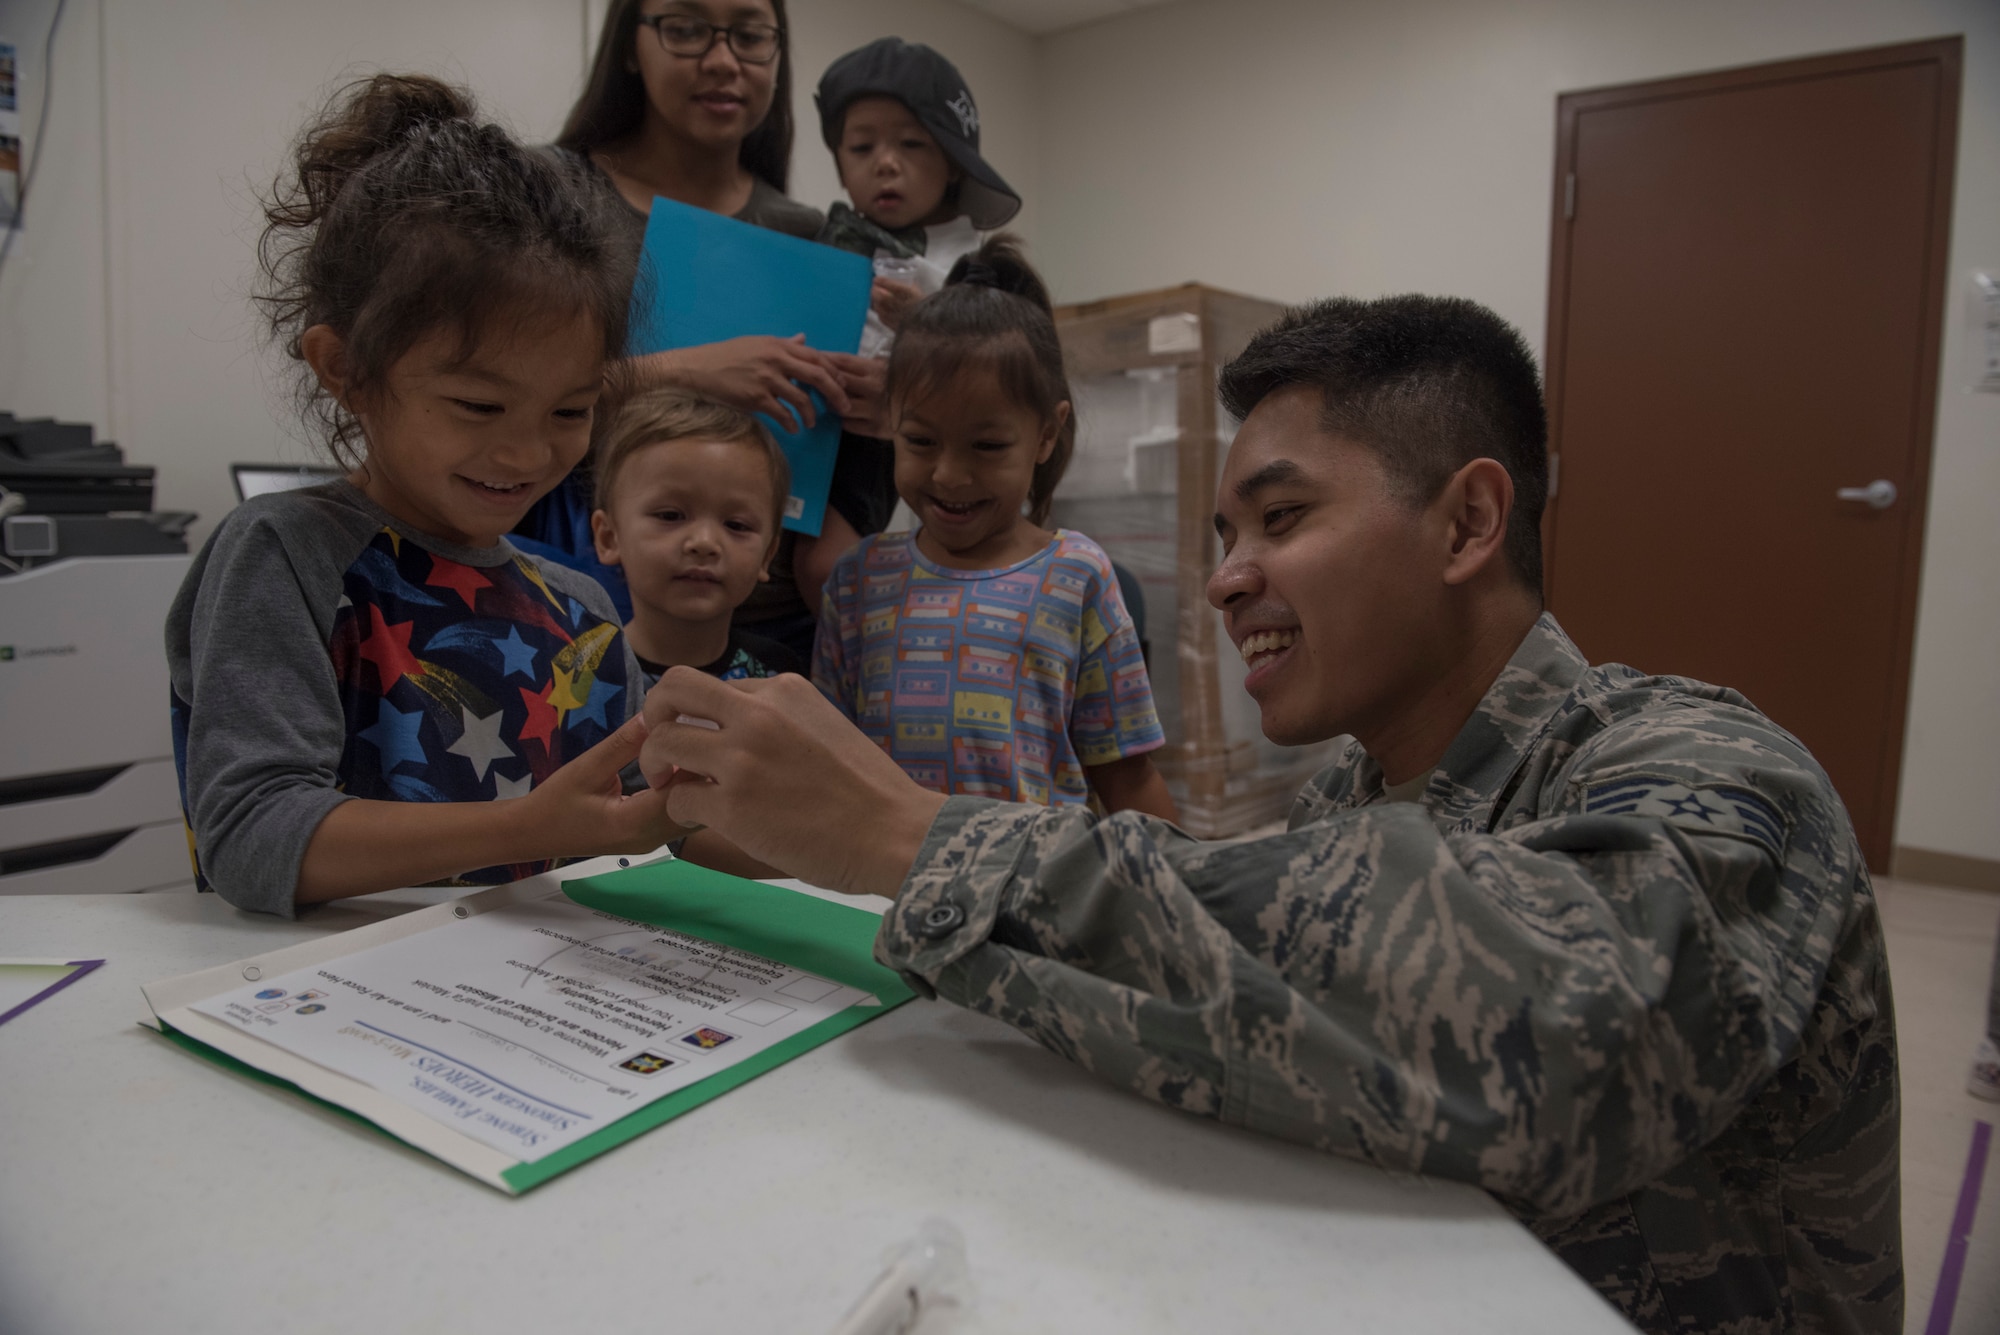 A U.S. Air Force Senior Airman assigned to the U.S. Air Force Reserve’s 44th Aerial Port Squadron, interacts with military children during Operation Inafa’ Maolek at Andersen Air Force Base, May 5, 2018.